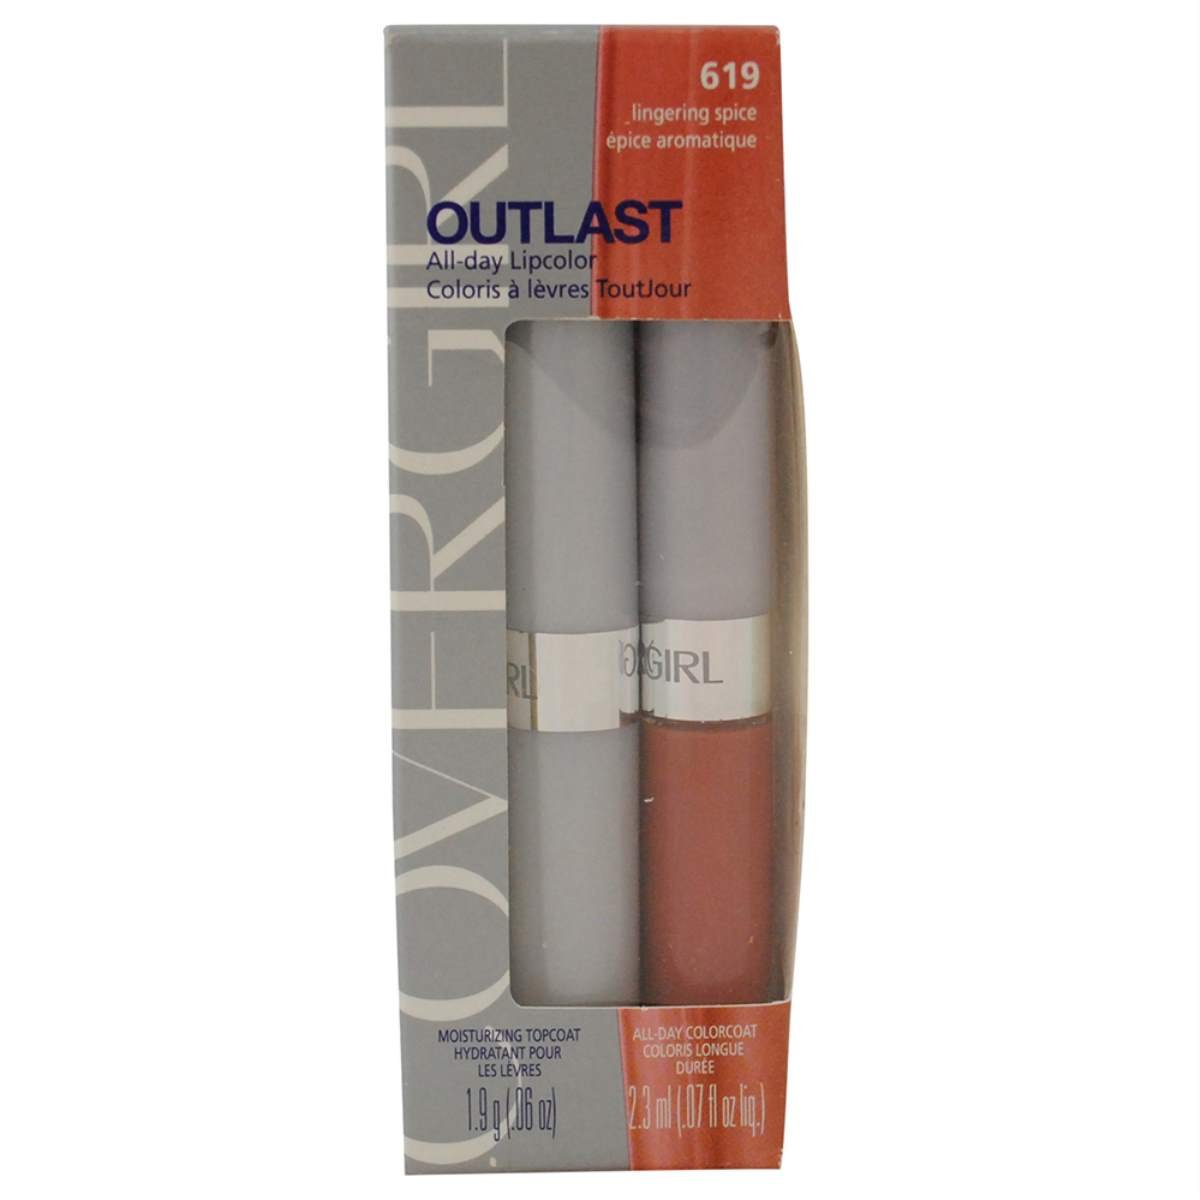 CoverGirl Outlast All Day Two Step Lipcolor, Lingering Spice 619, 0.13 Ounce